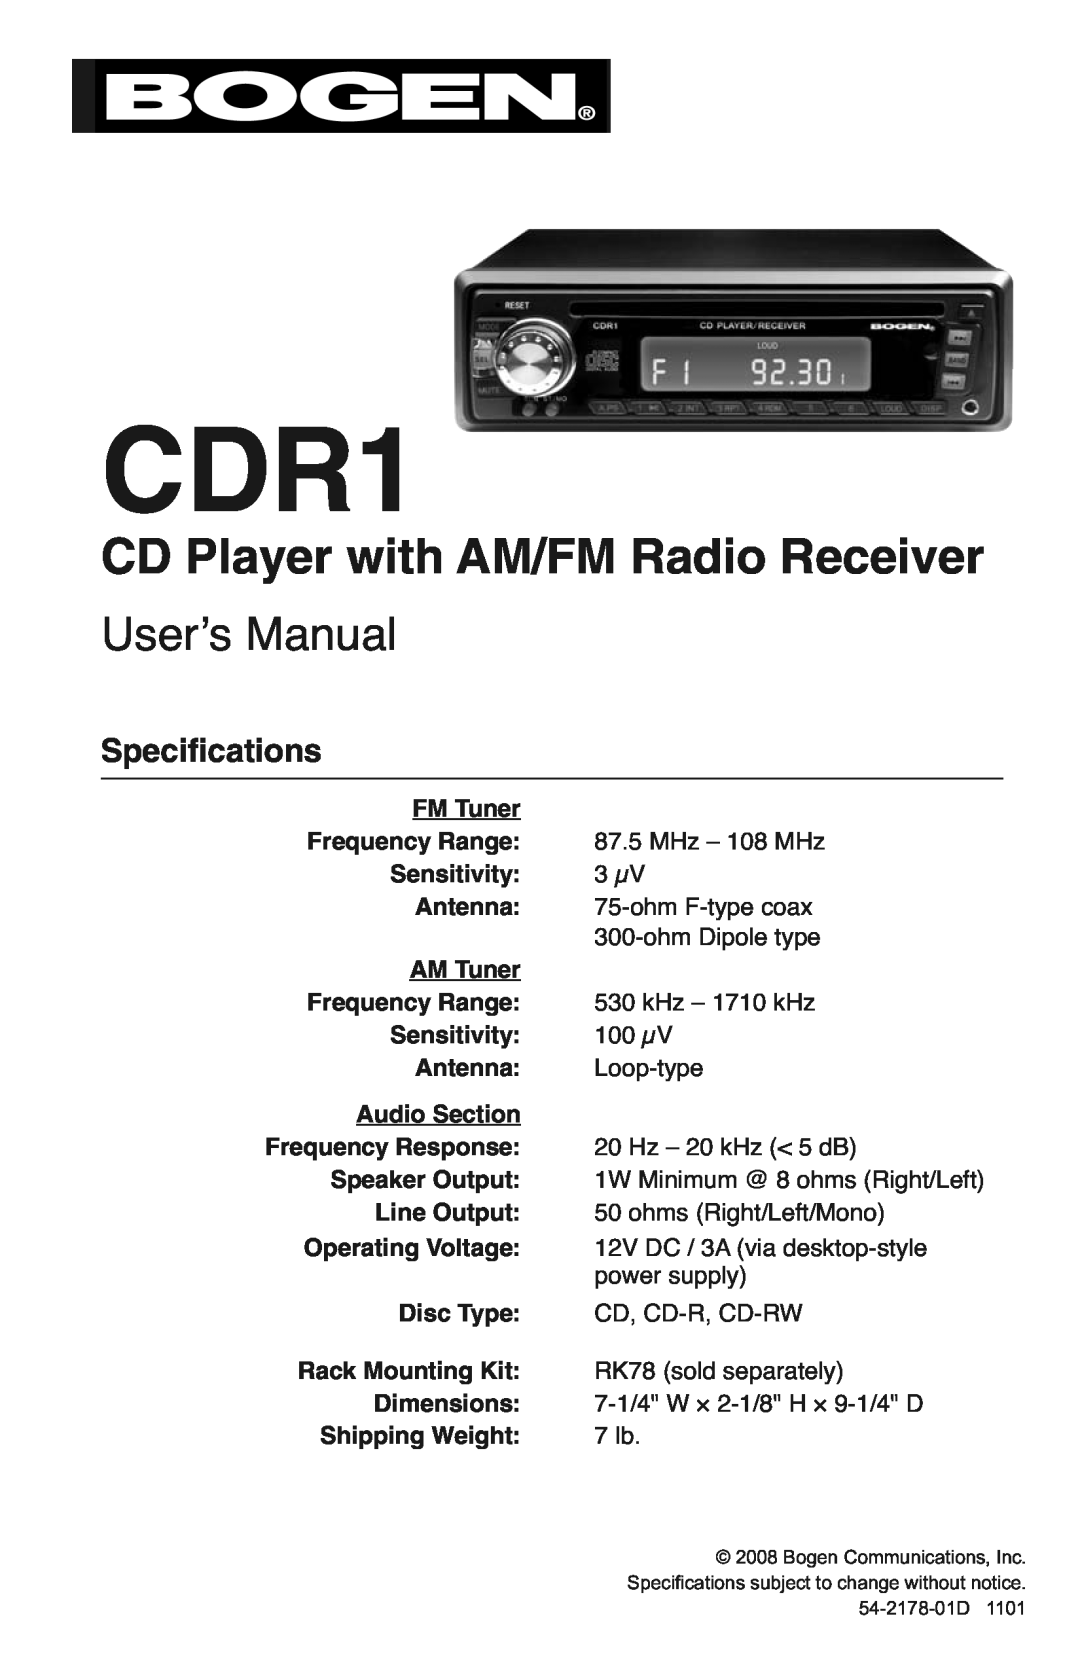 Bogen CDR1 specifications Specifications, CD Player with AM/FM Radio Receiver, Userʼs Manual 